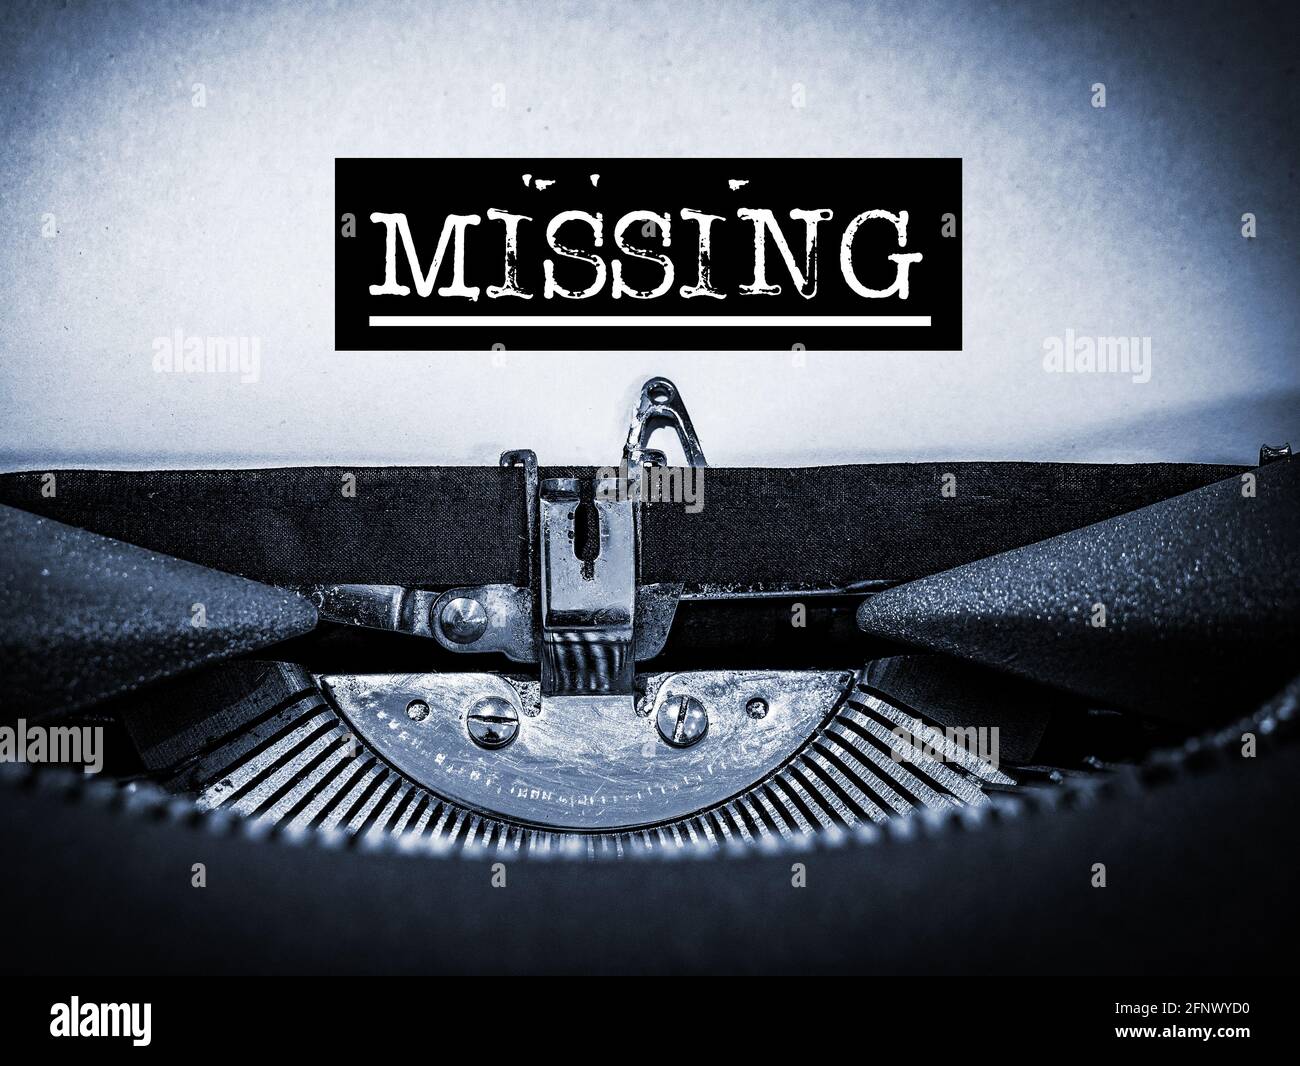 Missing displayed on a vintage typewriter with underline script and black border in a blue tone Stock Photo